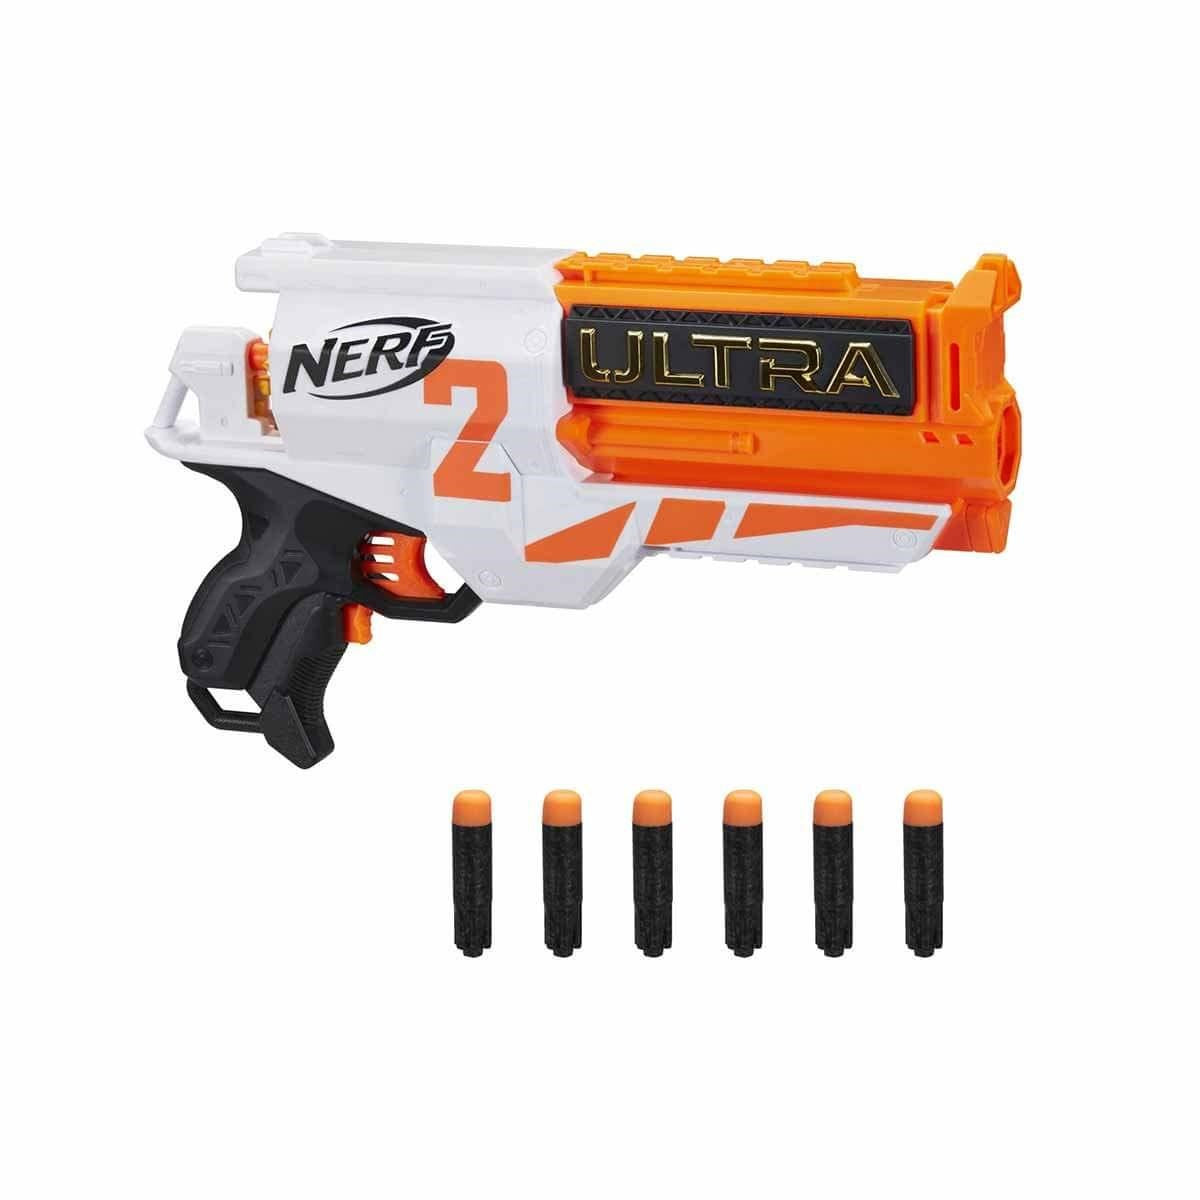 Nerf Ultra Two E7921 | Toysall